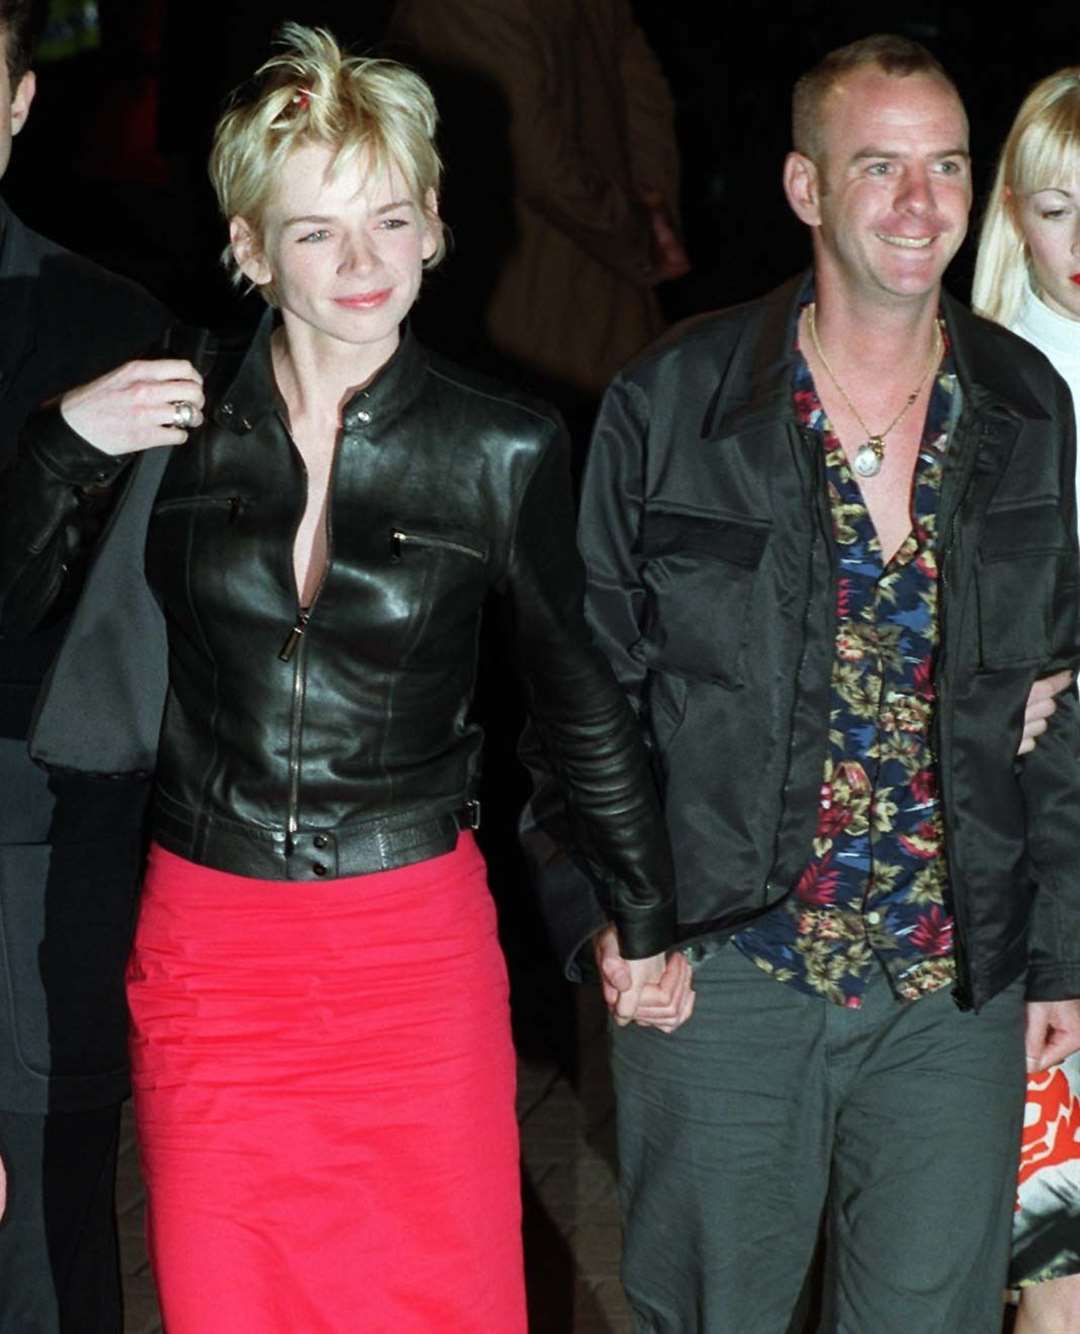 Zoe Ball and Fatboy Slim (Norman Cook), parents of Woody Cook, arriving together at the Brit Awards in 1999. Picture: Michael Walter/PA